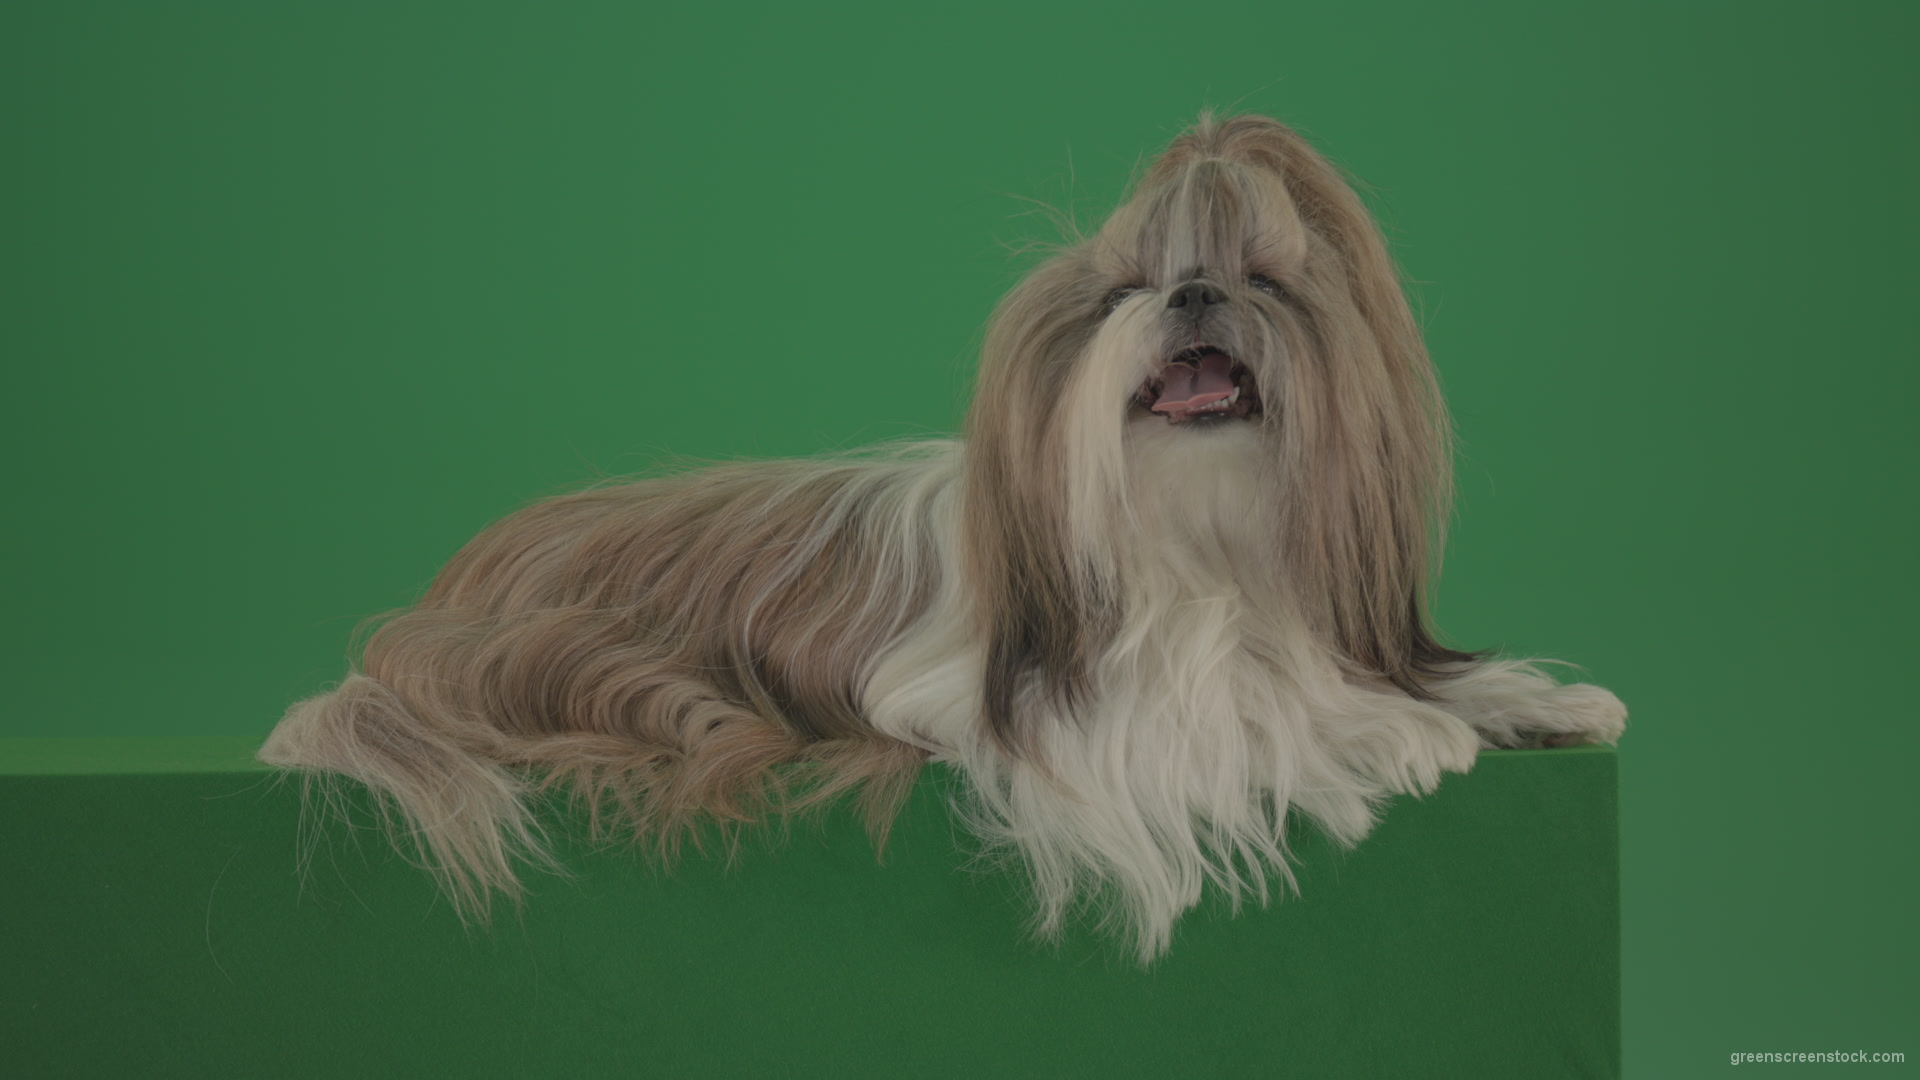 Fashion-luxury-toy-dog-Shihtzu-chilling-on-green-screen-isolated-background-4K_001 Green Screen Stock